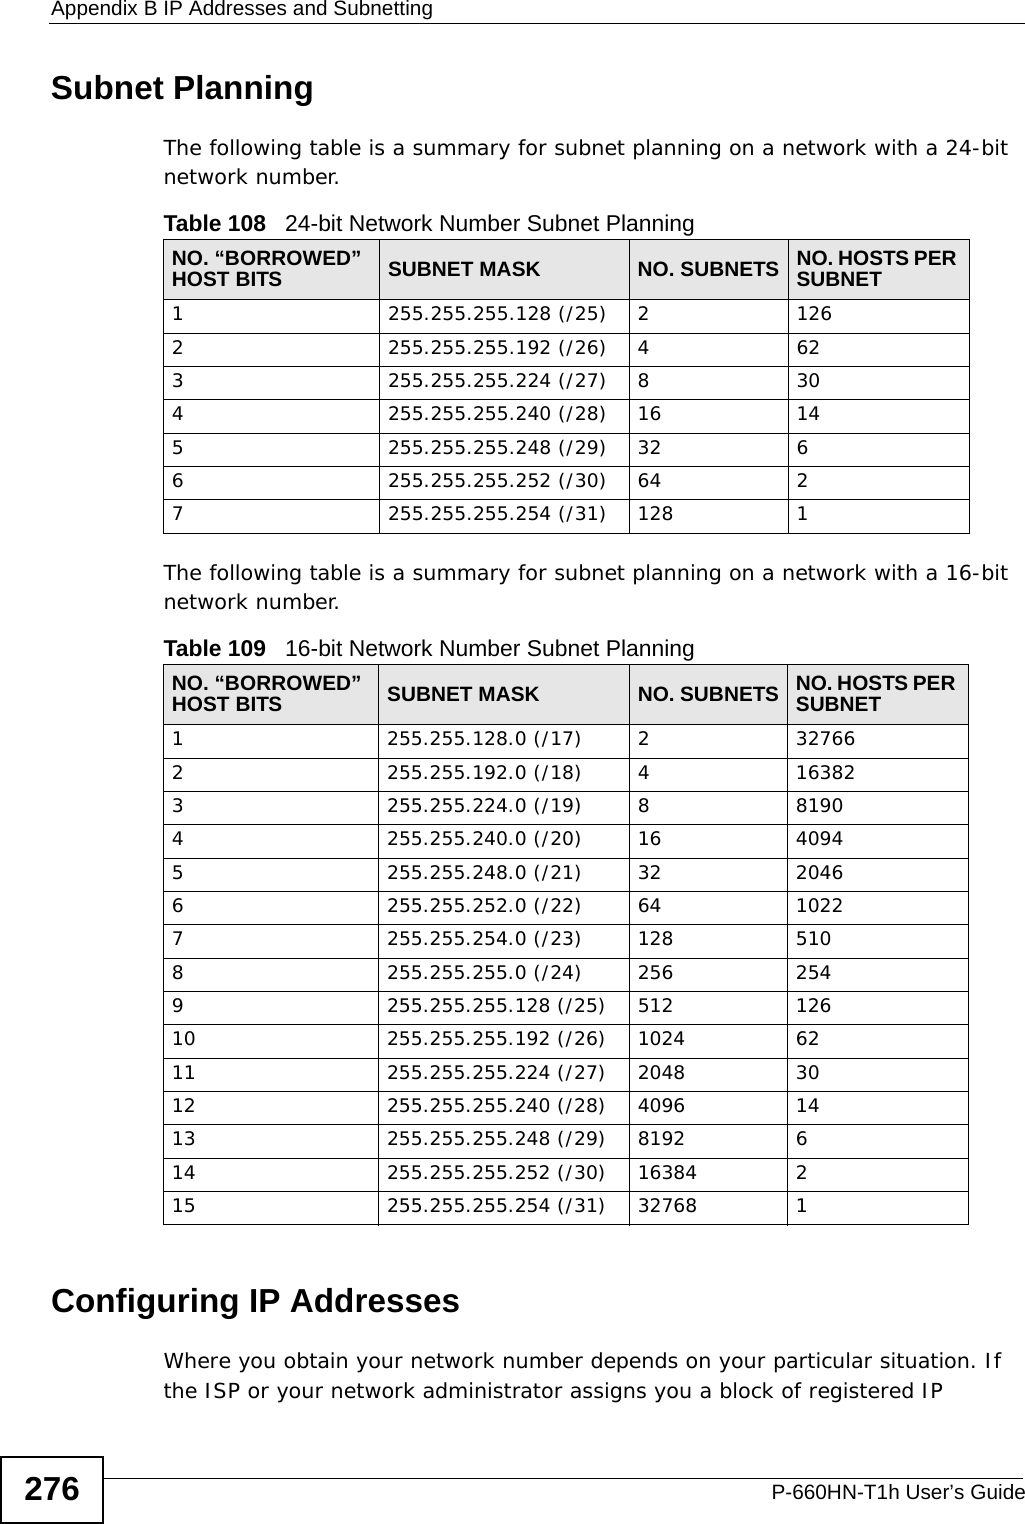 Appendix B IP Addresses and SubnettingP-660HN-T1h User’s Guide276Subnet PlanningThe following table is a summary for subnet planning on a network with a 24-bit network number.The following table is a summary for subnet planning on a network with a 16-bit network number. Configuring IP AddressesWhere you obtain your network number depends on your particular situation. If the ISP or your network administrator assigns you a block of registered IP Table 108   24-bit Network Number Subnet PlanningNO. “BORROWED” HOST BITS SUBNET MASK NO. SUBNETS NO. HOSTS PER SUBNET1255.255.255.128 (/25) 21262255.255.255.192 (/26) 4623255.255.255.224 (/27) 8304255.255.255.240 (/28) 16 145255.255.255.248 (/29) 32 66255.255.255.252 (/30) 64 27255.255.255.254 (/31) 128 1Table 109   16-bit Network Number Subnet PlanningNO. “BORROWED” HOST BITS SUBNET MASK NO. SUBNETS NO. HOSTS PER SUBNET1255.255.128.0 (/17) 2327662255.255.192.0 (/18) 4163823255.255.224.0 (/19) 881904255.255.240.0 (/20) 16 40945255.255.248.0 (/21) 32 20466255.255.252.0 (/22) 64 10227255.255.254.0 (/23) 128 5108255.255.255.0 (/24) 256 2549255.255.255.128 (/25) 512 12610 255.255.255.192 (/26) 1024 6211 255.255.255.224 (/27) 2048 3012 255.255.255.240 (/28) 4096 1413 255.255.255.248 (/29) 8192 614 255.255.255.252 (/30) 16384 215 255.255.255.254 (/31) 32768 1